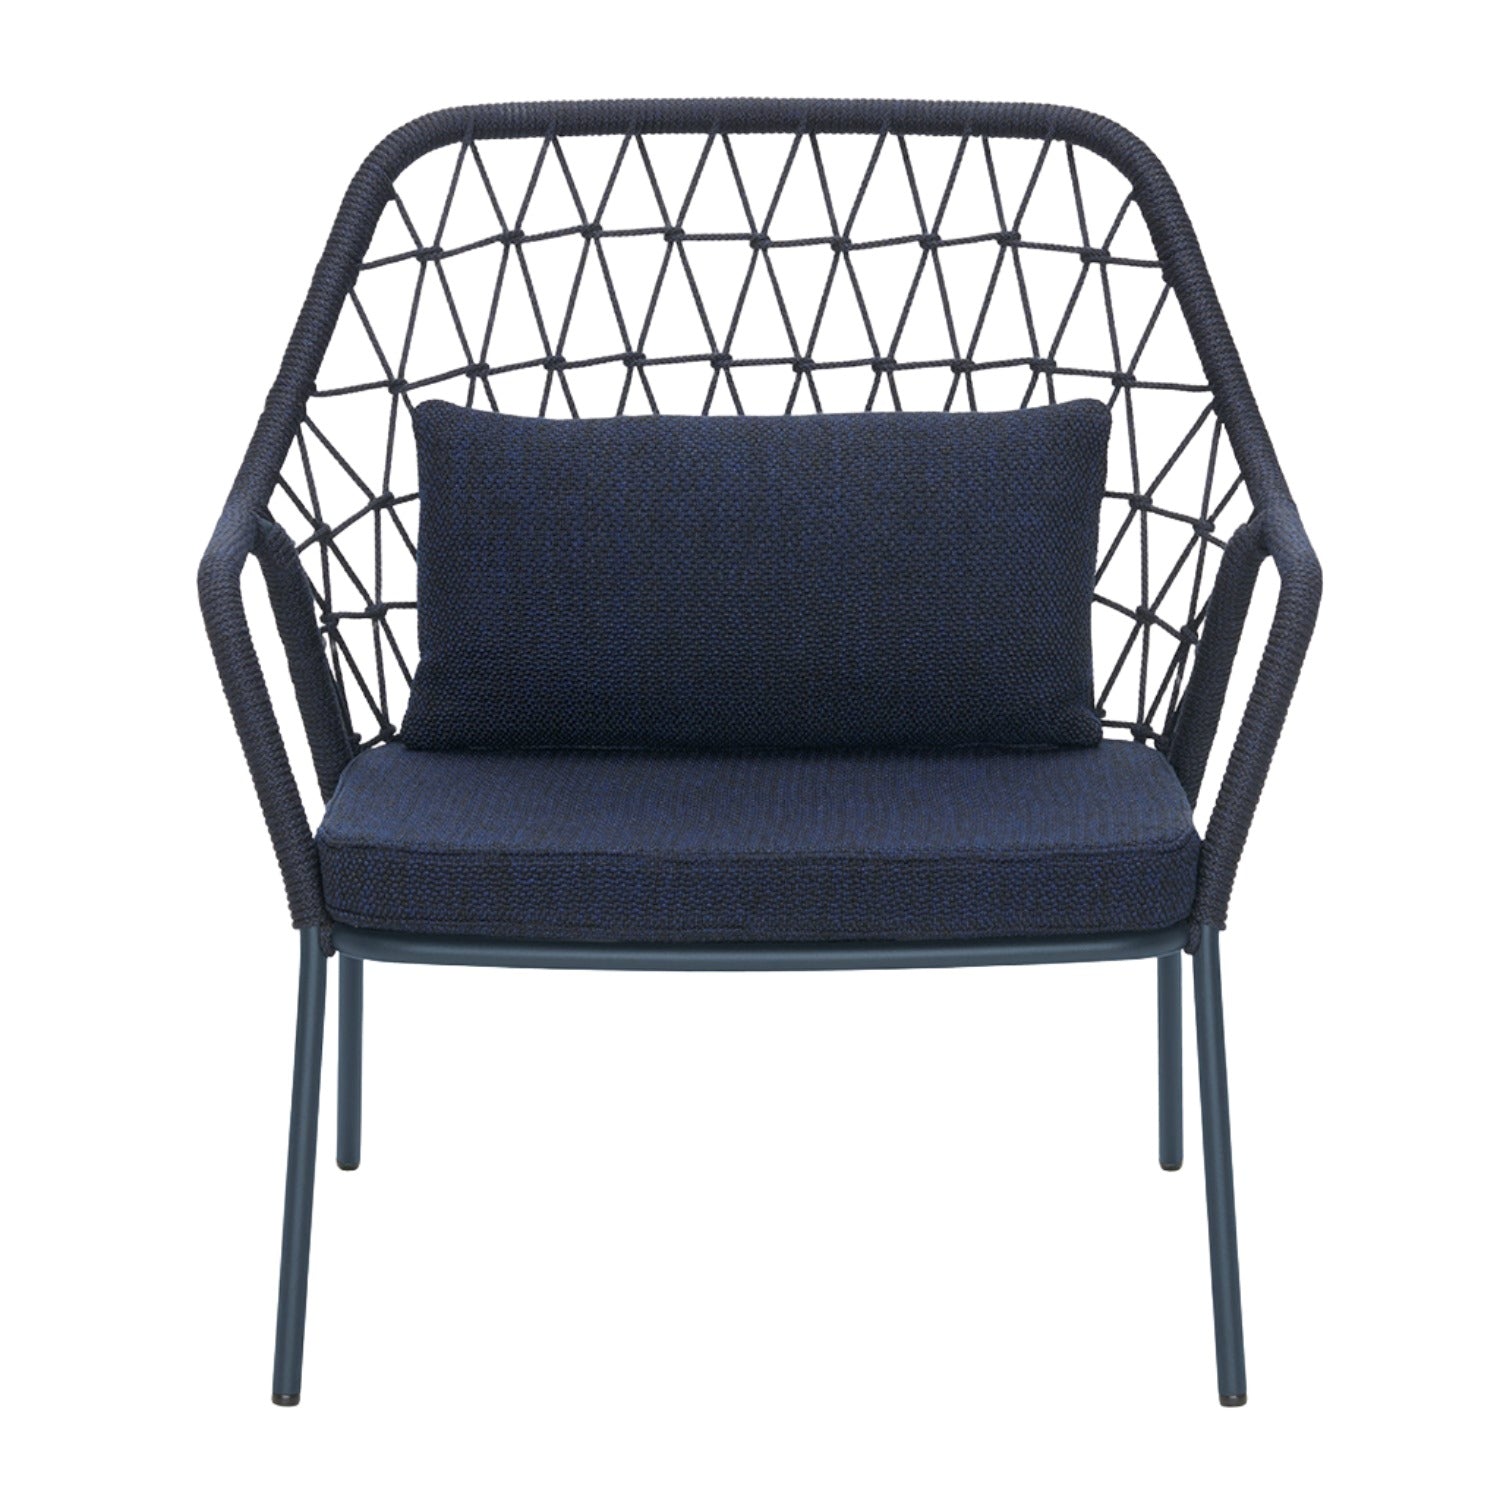 Pedrali Panarea 3679 outdoor lounge chair in blue front view